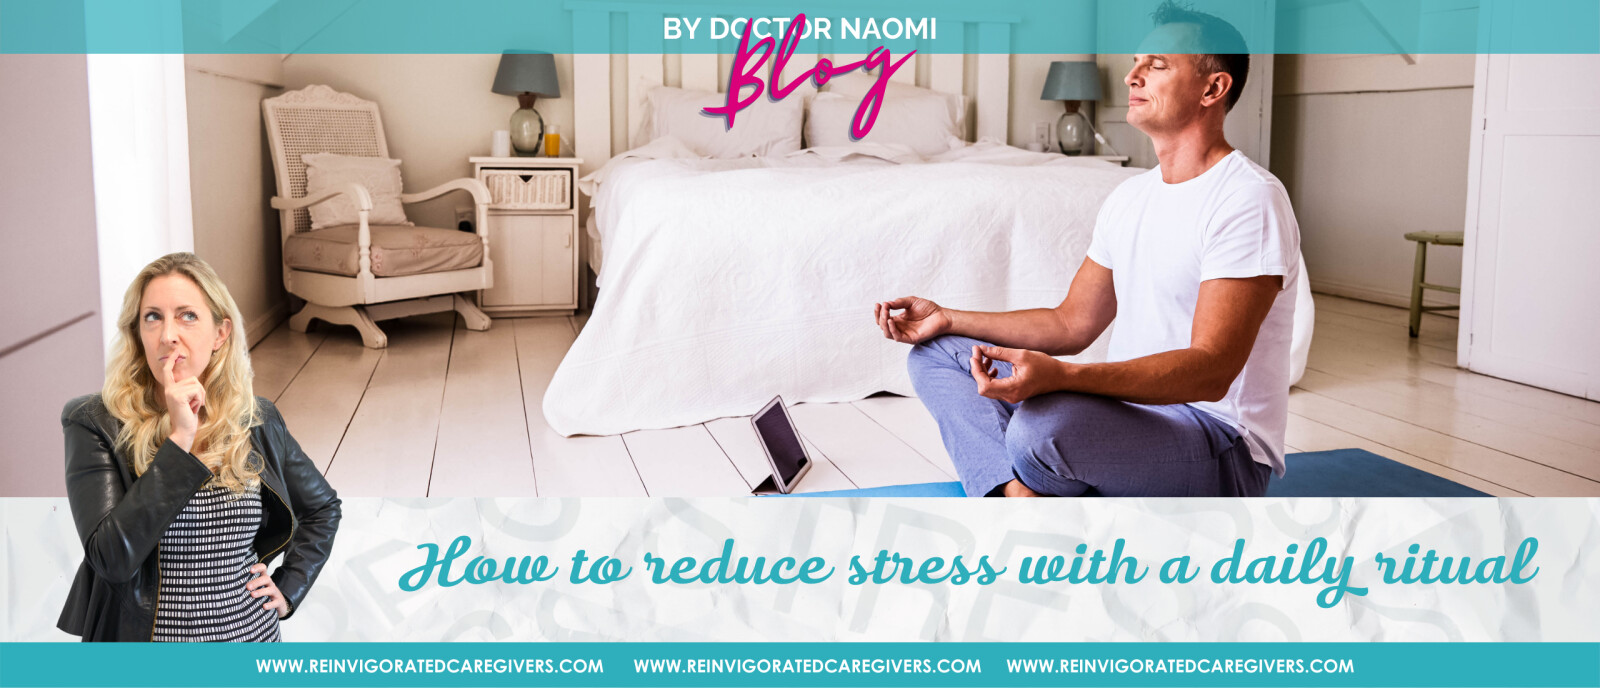 How to reduces stress with a daily ritual